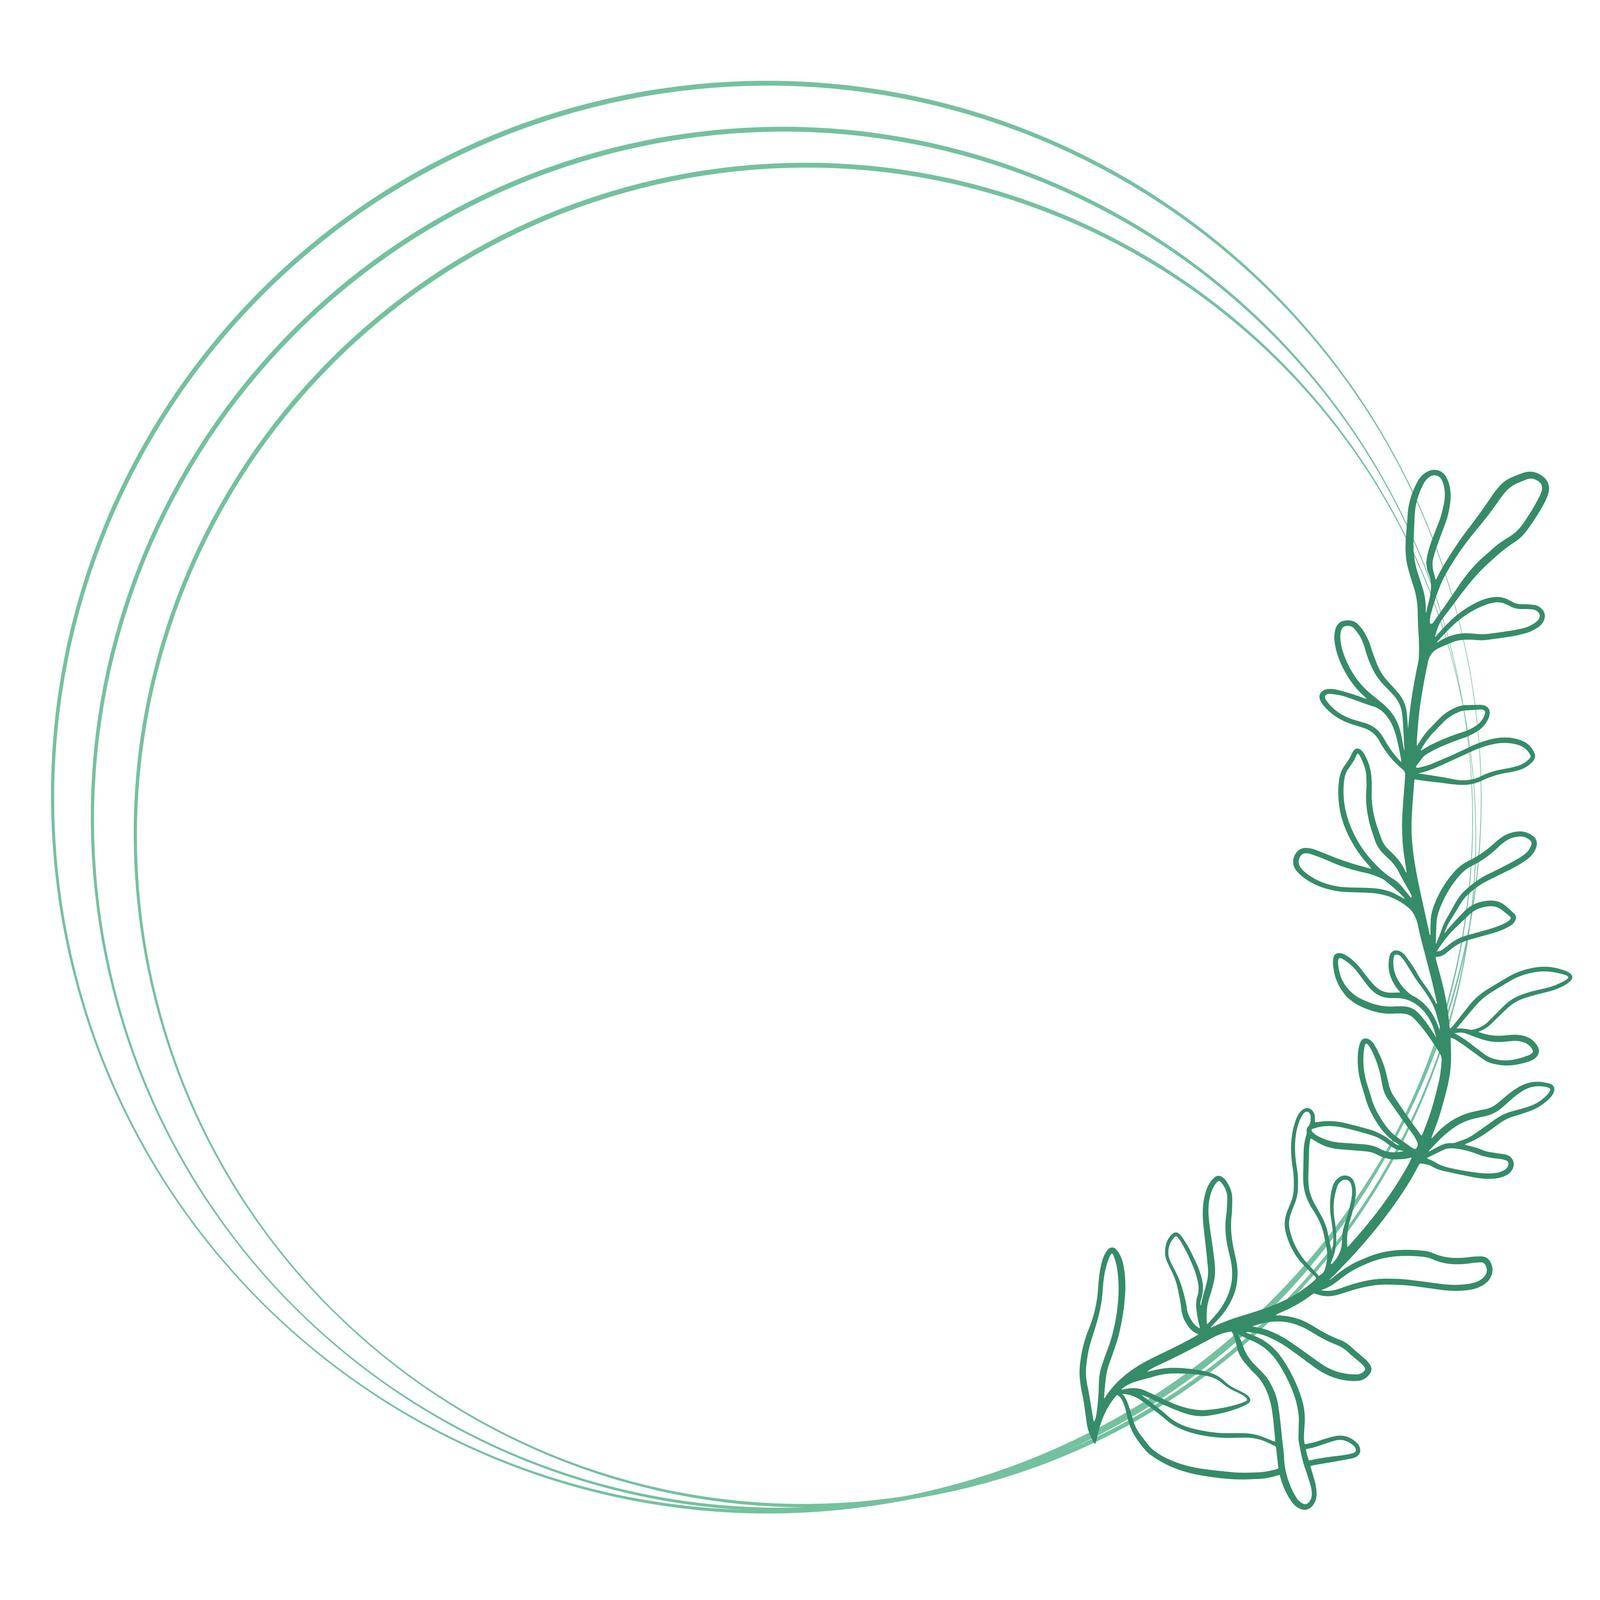 Beautiful circular wreath with a graceful branch, vector illustration. Round composite botanical template for congratulations or invitations. Hand drawn graphics, natural contour with leaves.